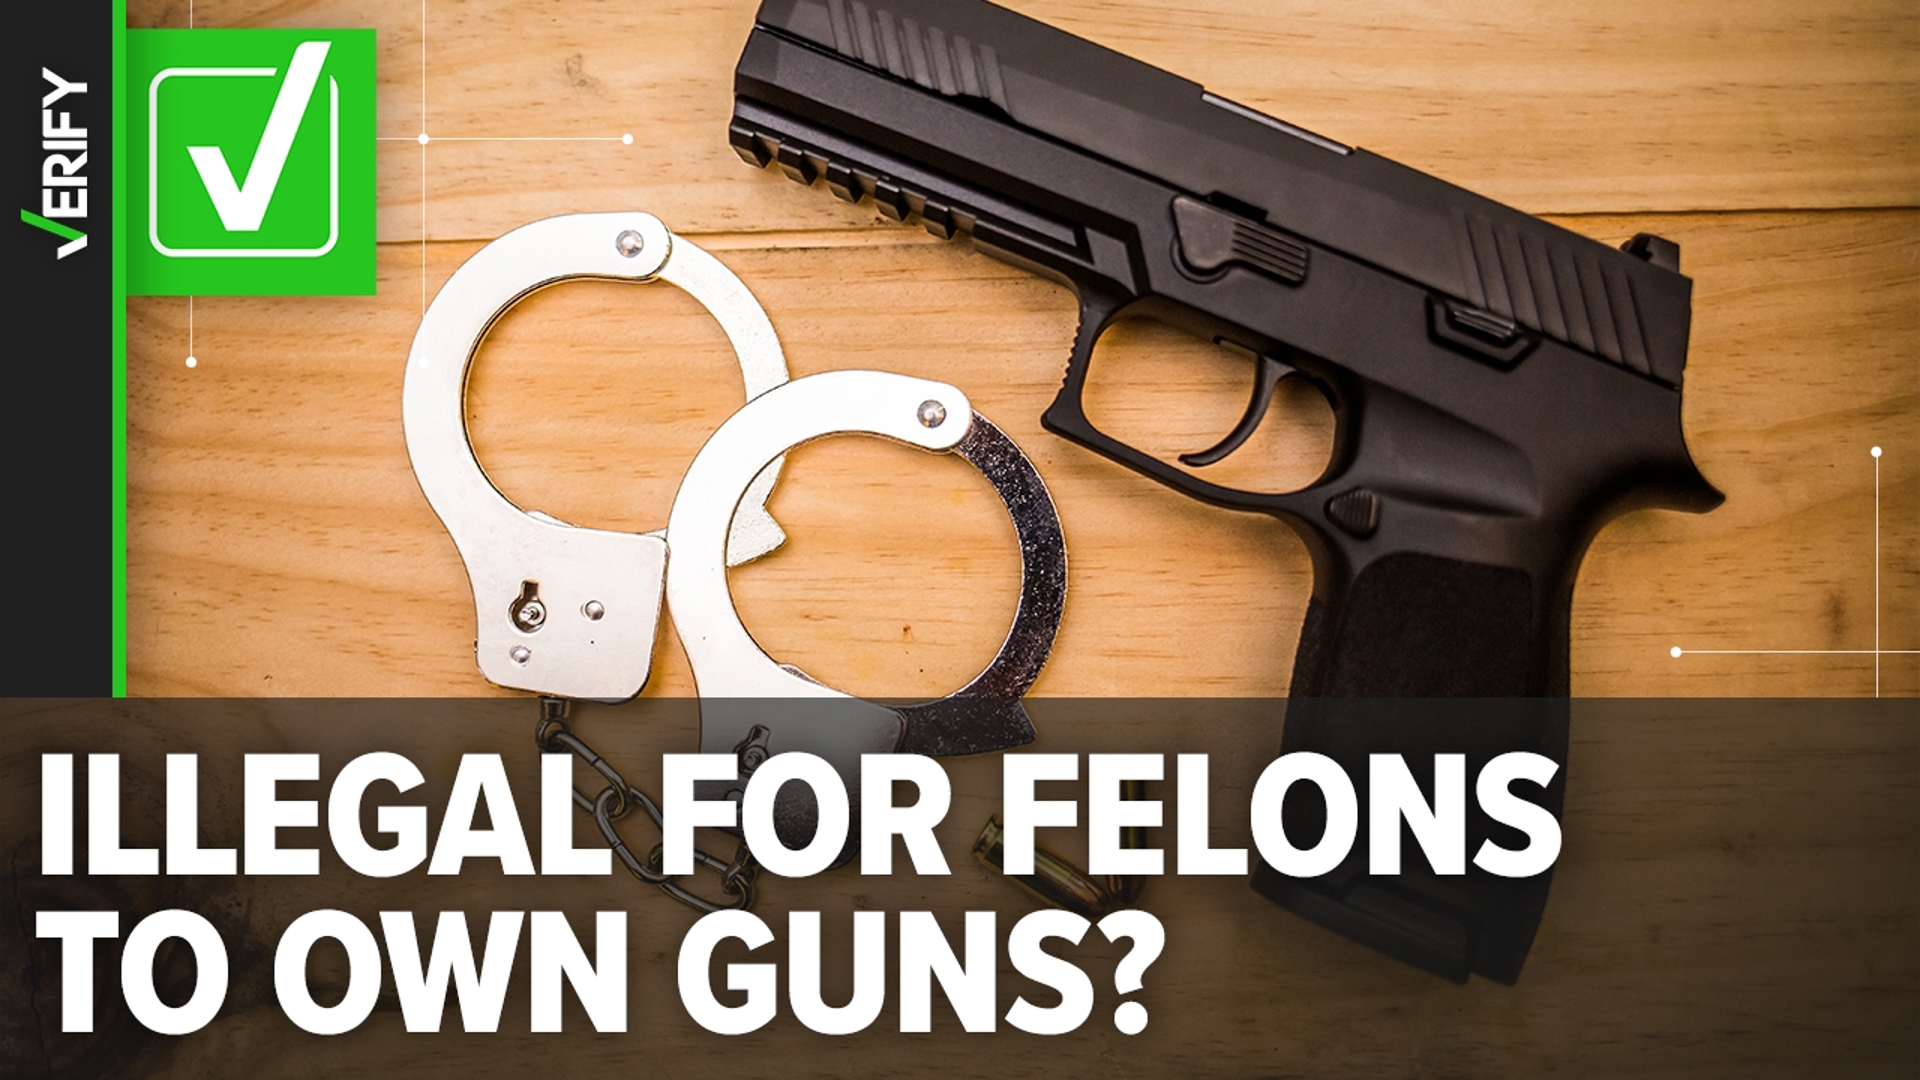 After former President Trump’s felony conviction in his New York hush money case, people claimed federal law makes it illegal for felons to have guns. That’s true.